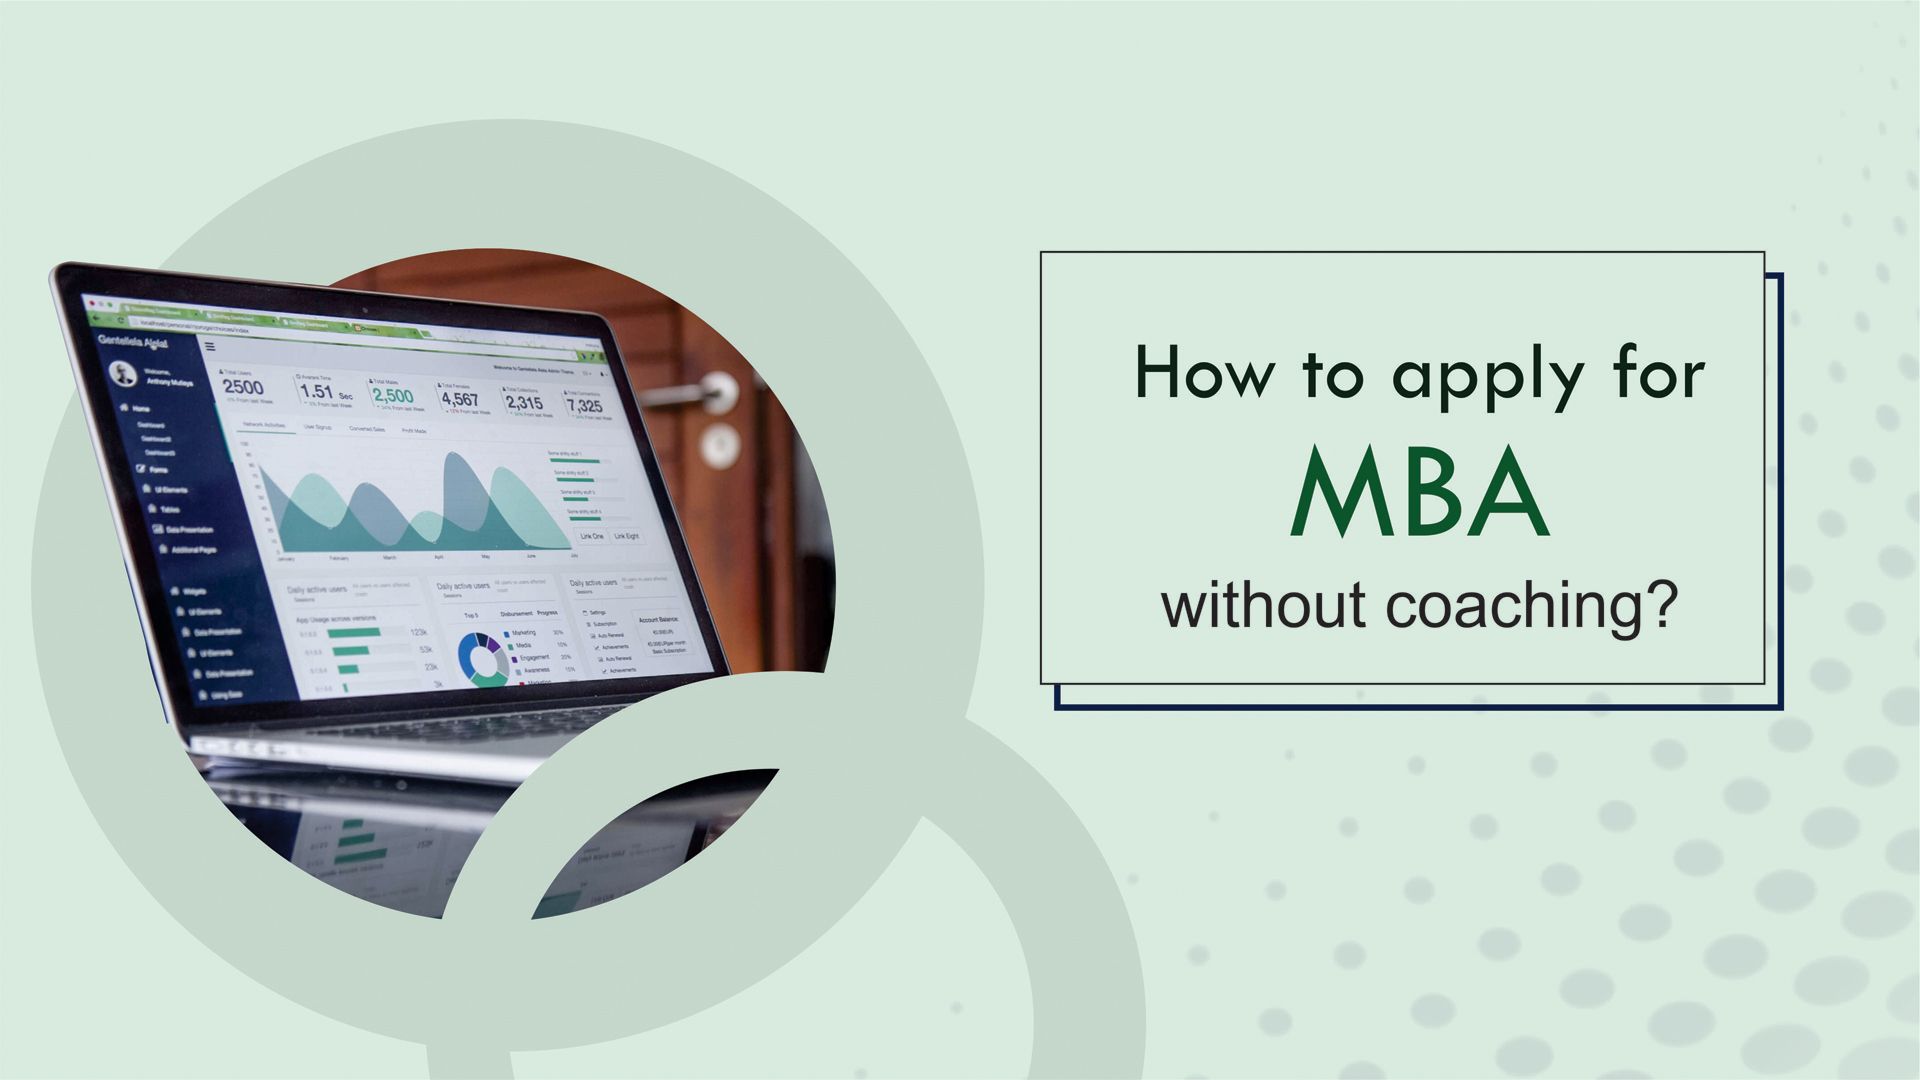 How to apply for MBA without
                        coaching?